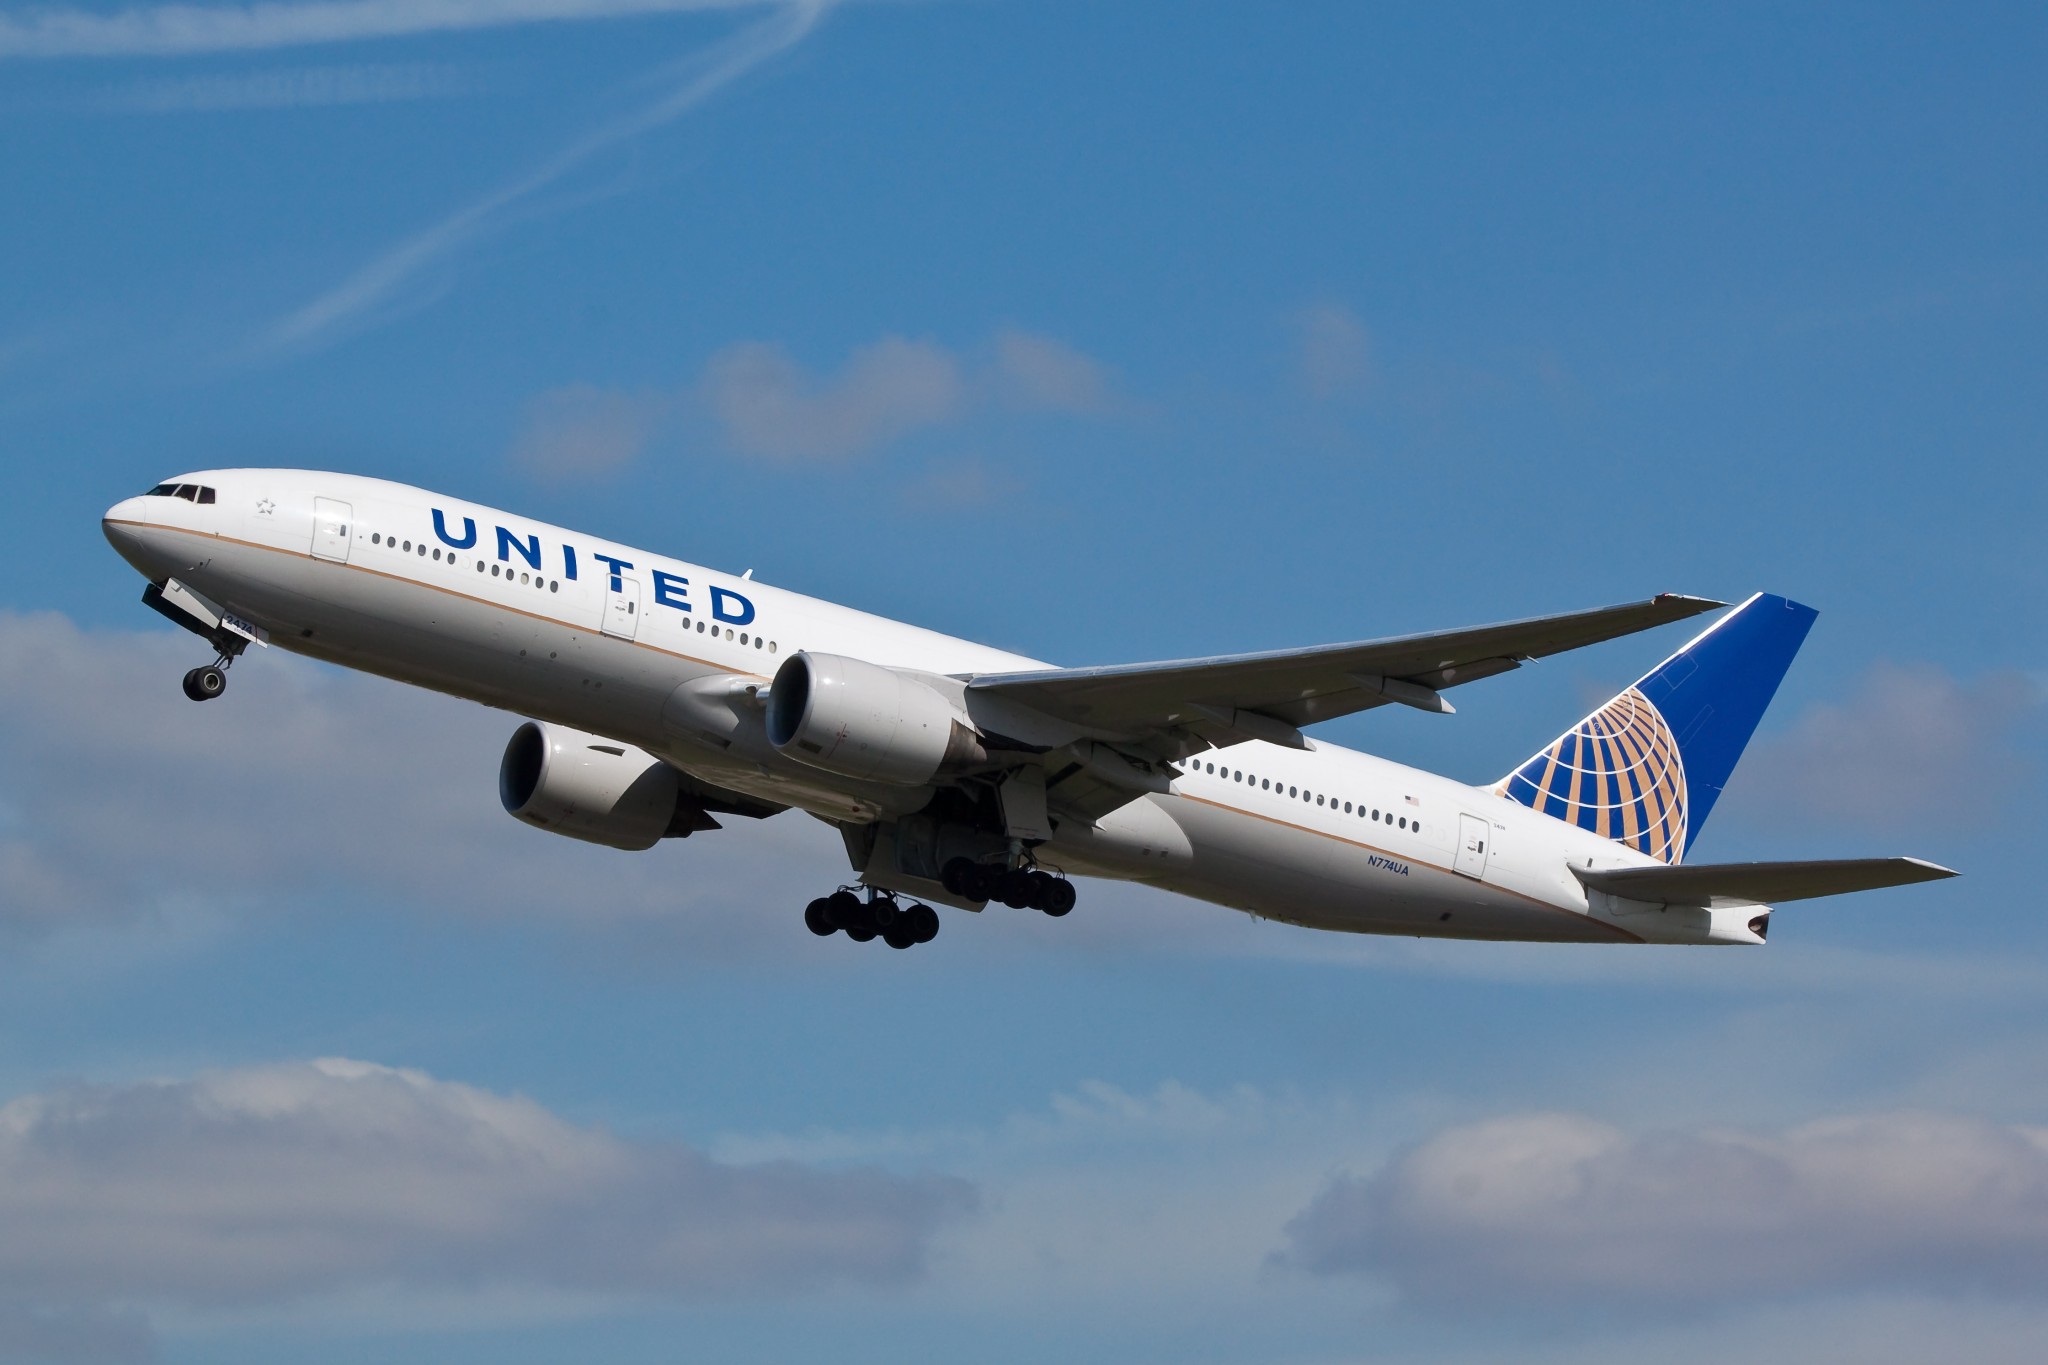 United Airlines acquires a flight training academy focused on training and developing aspiring pilots